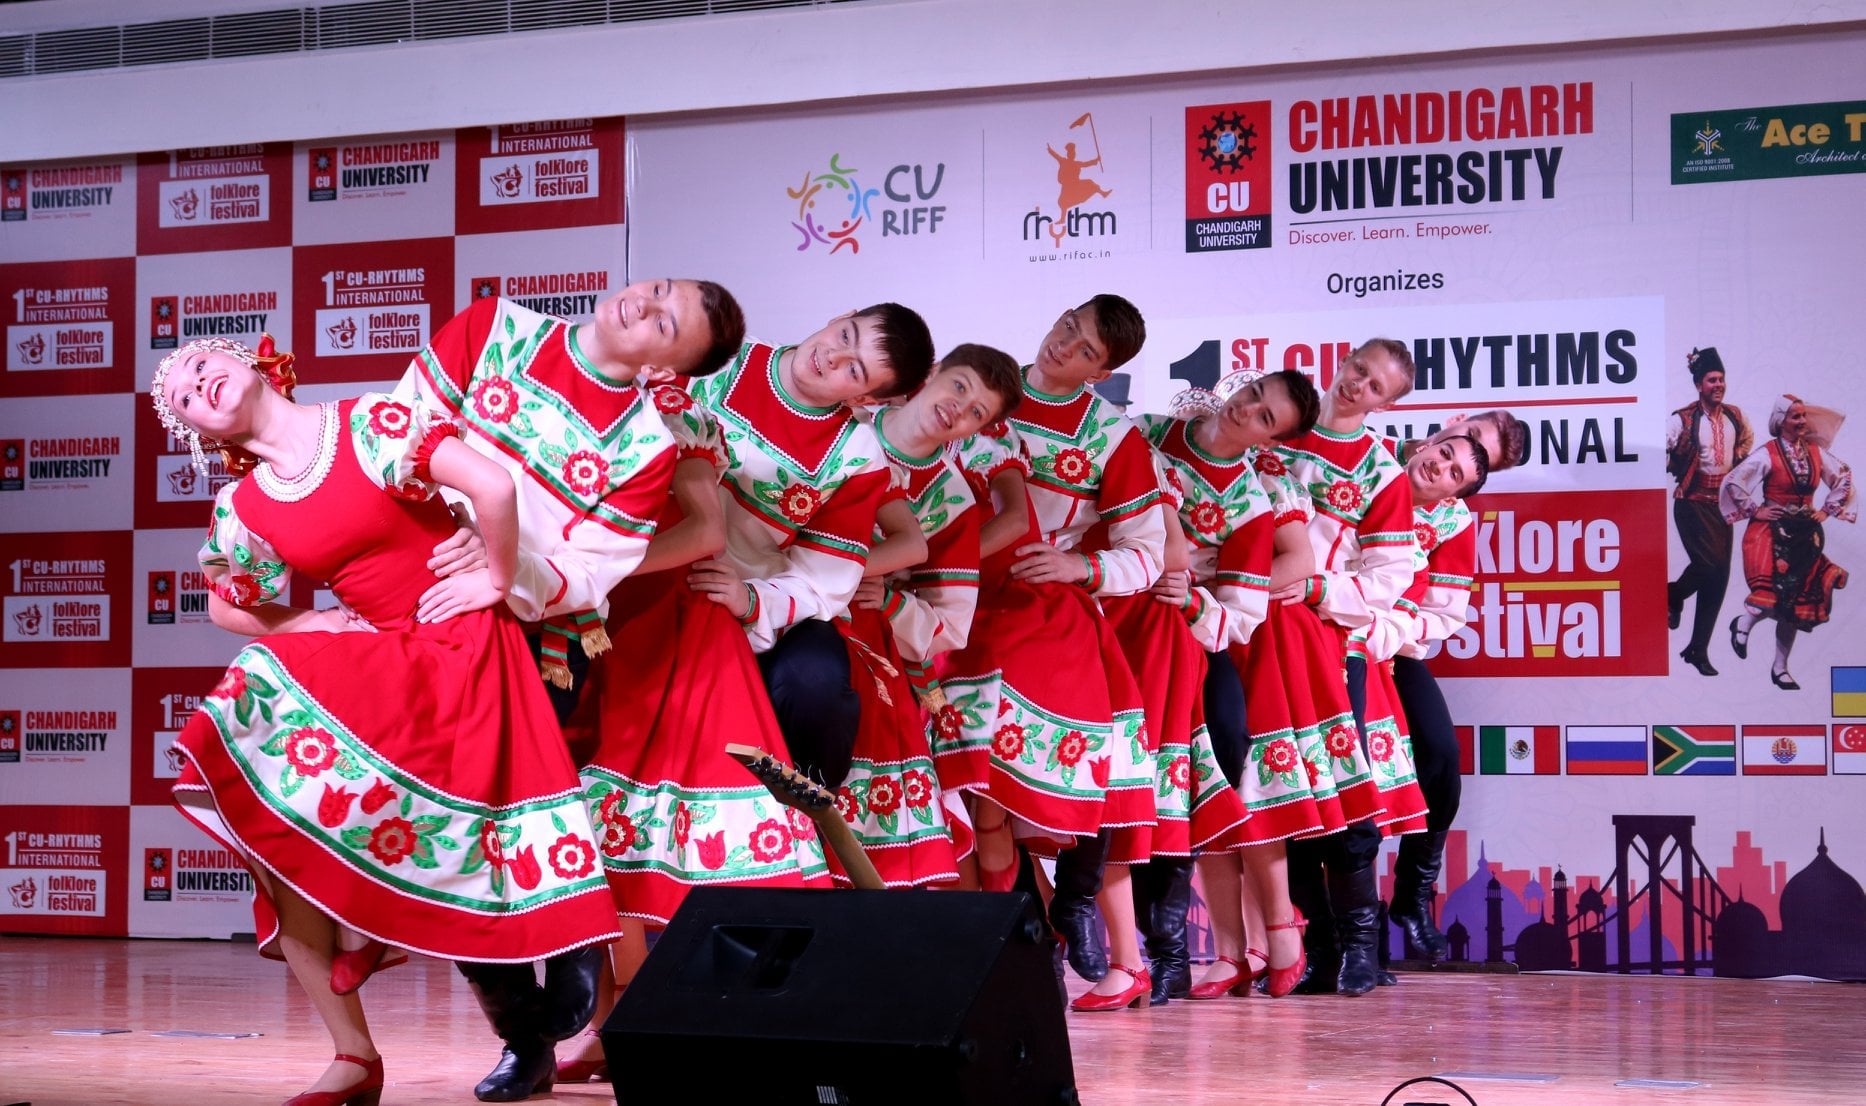 Cultural Diversity at Chandigarh University